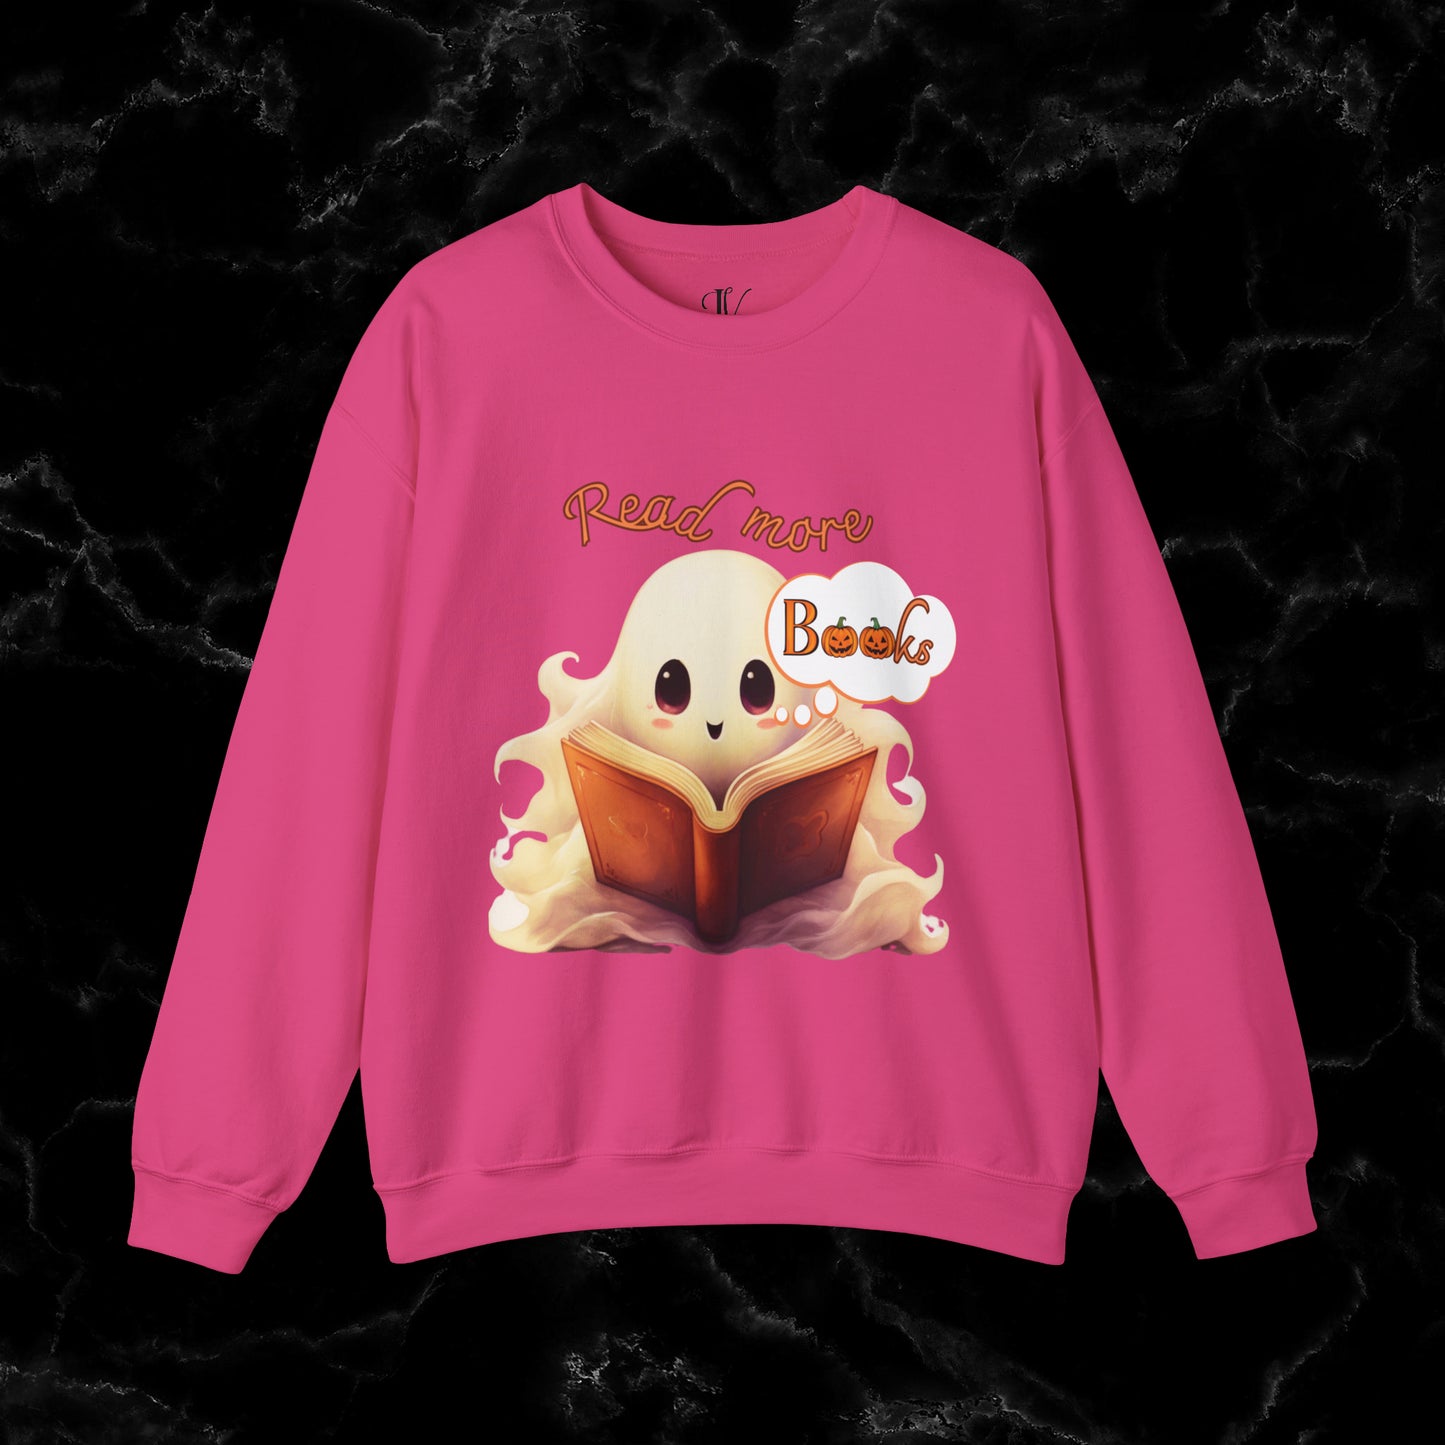 Read More Books Sweatshirt - Book Lover Halloween Sweater for Librarians and Students Sweatshirt S Heliconia 